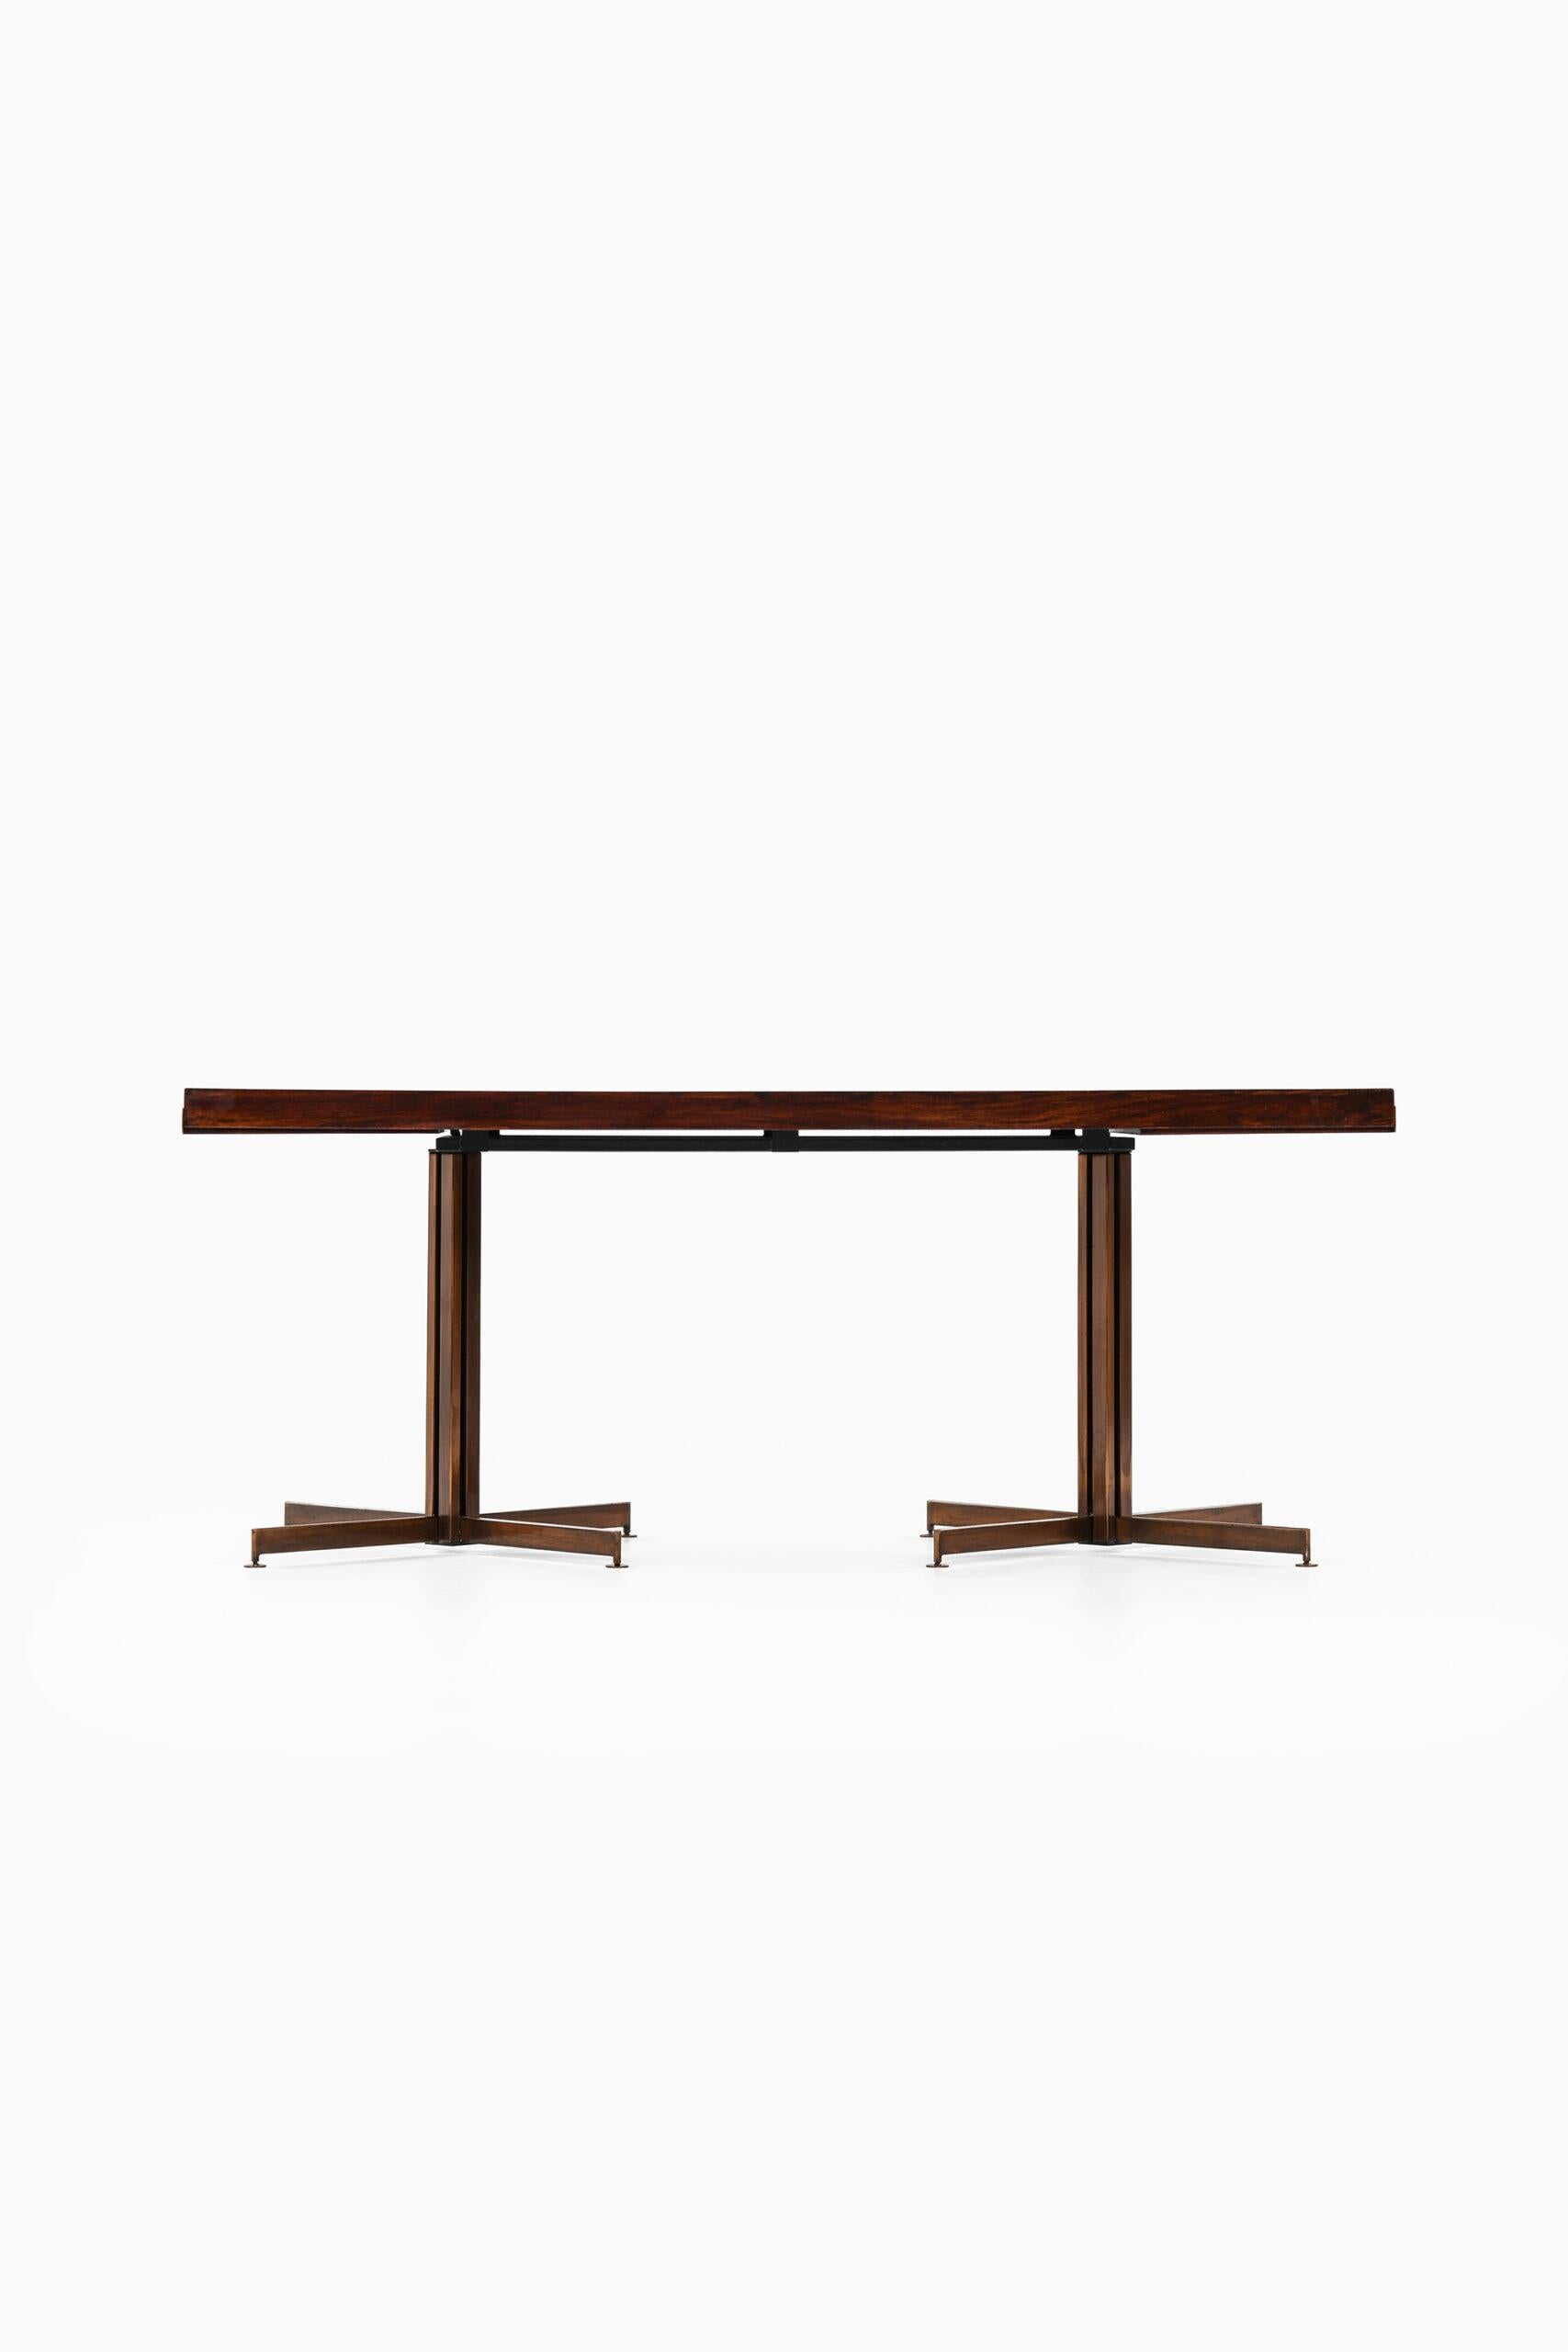 Rare dining table by unknown designer. Produced in Italy.
Dimensions (W x D x H): 180,5 ( 256 ) x 84 x 72 cm.